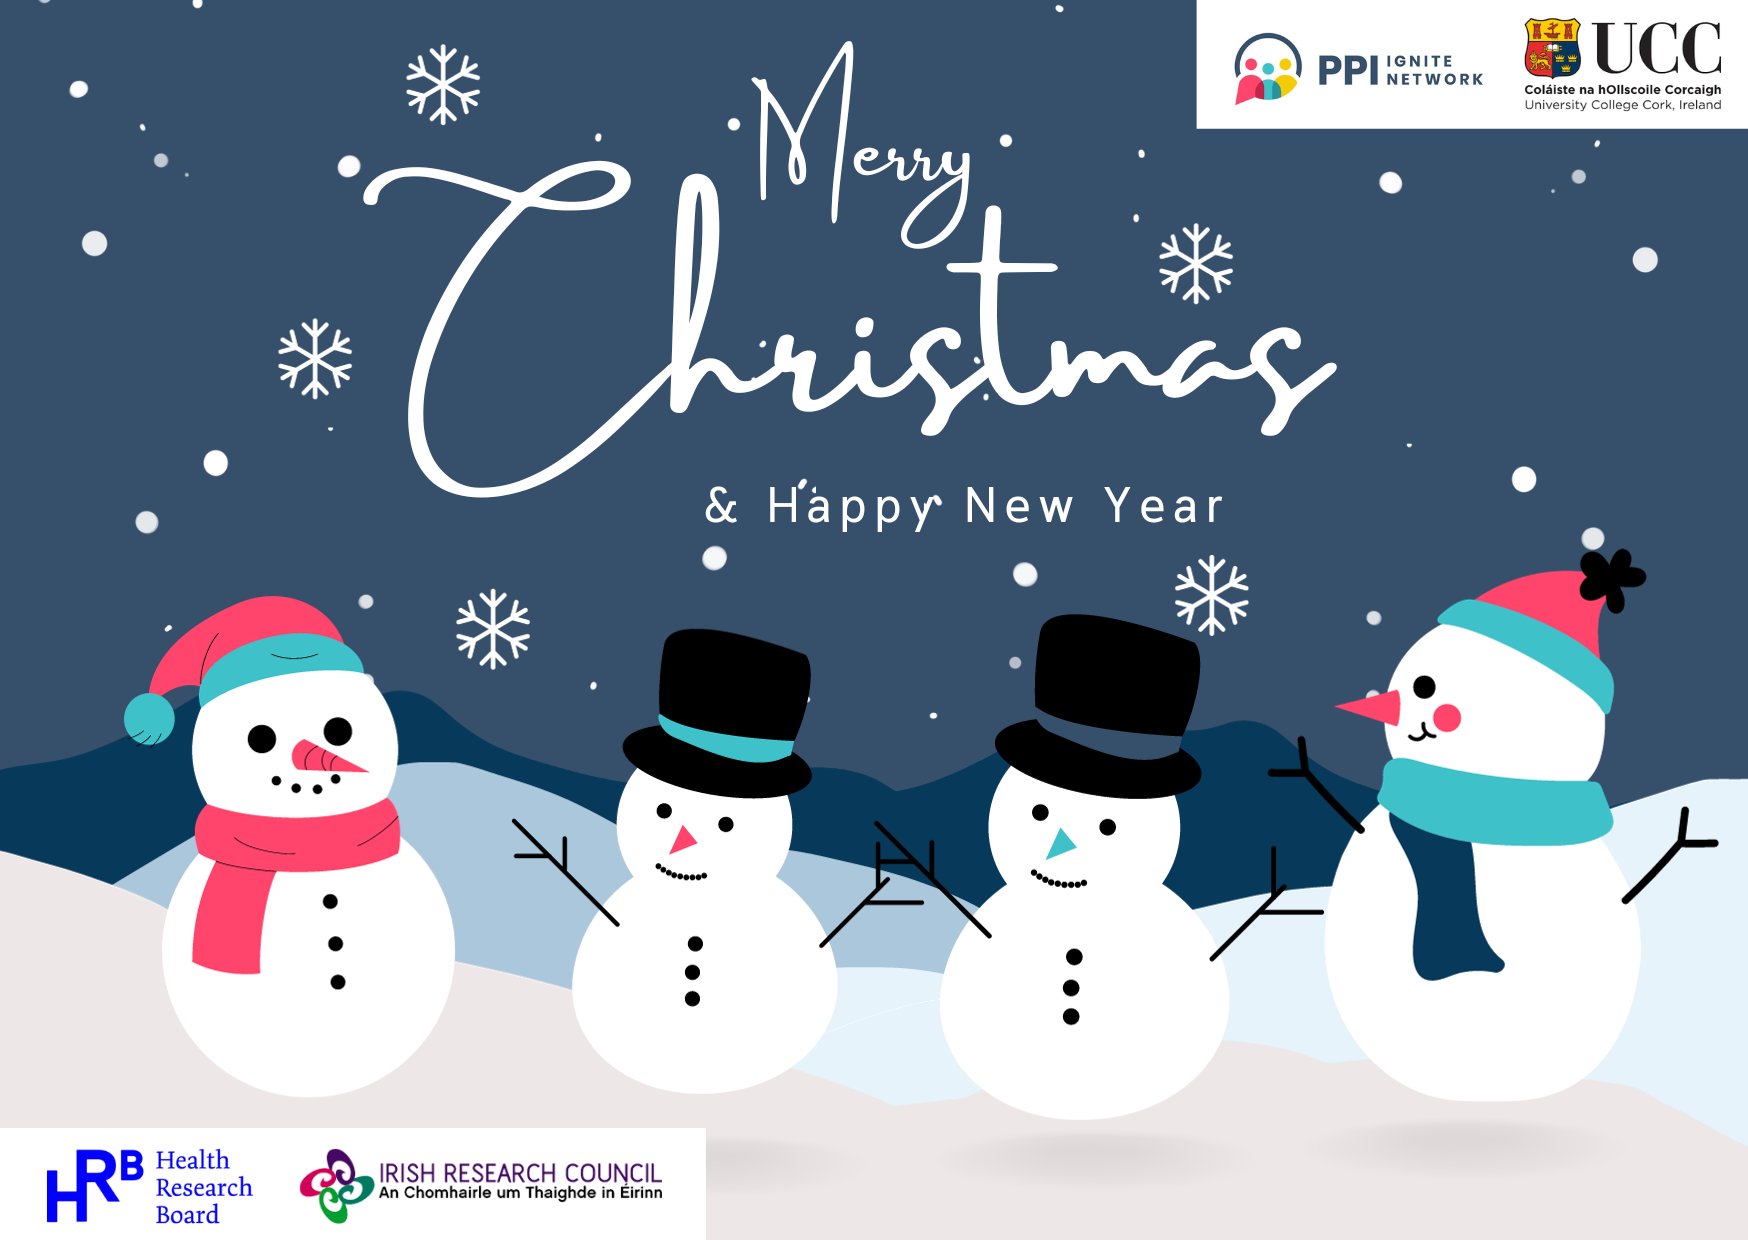 Merry Christmas from PPI Ignite Network@ UCC